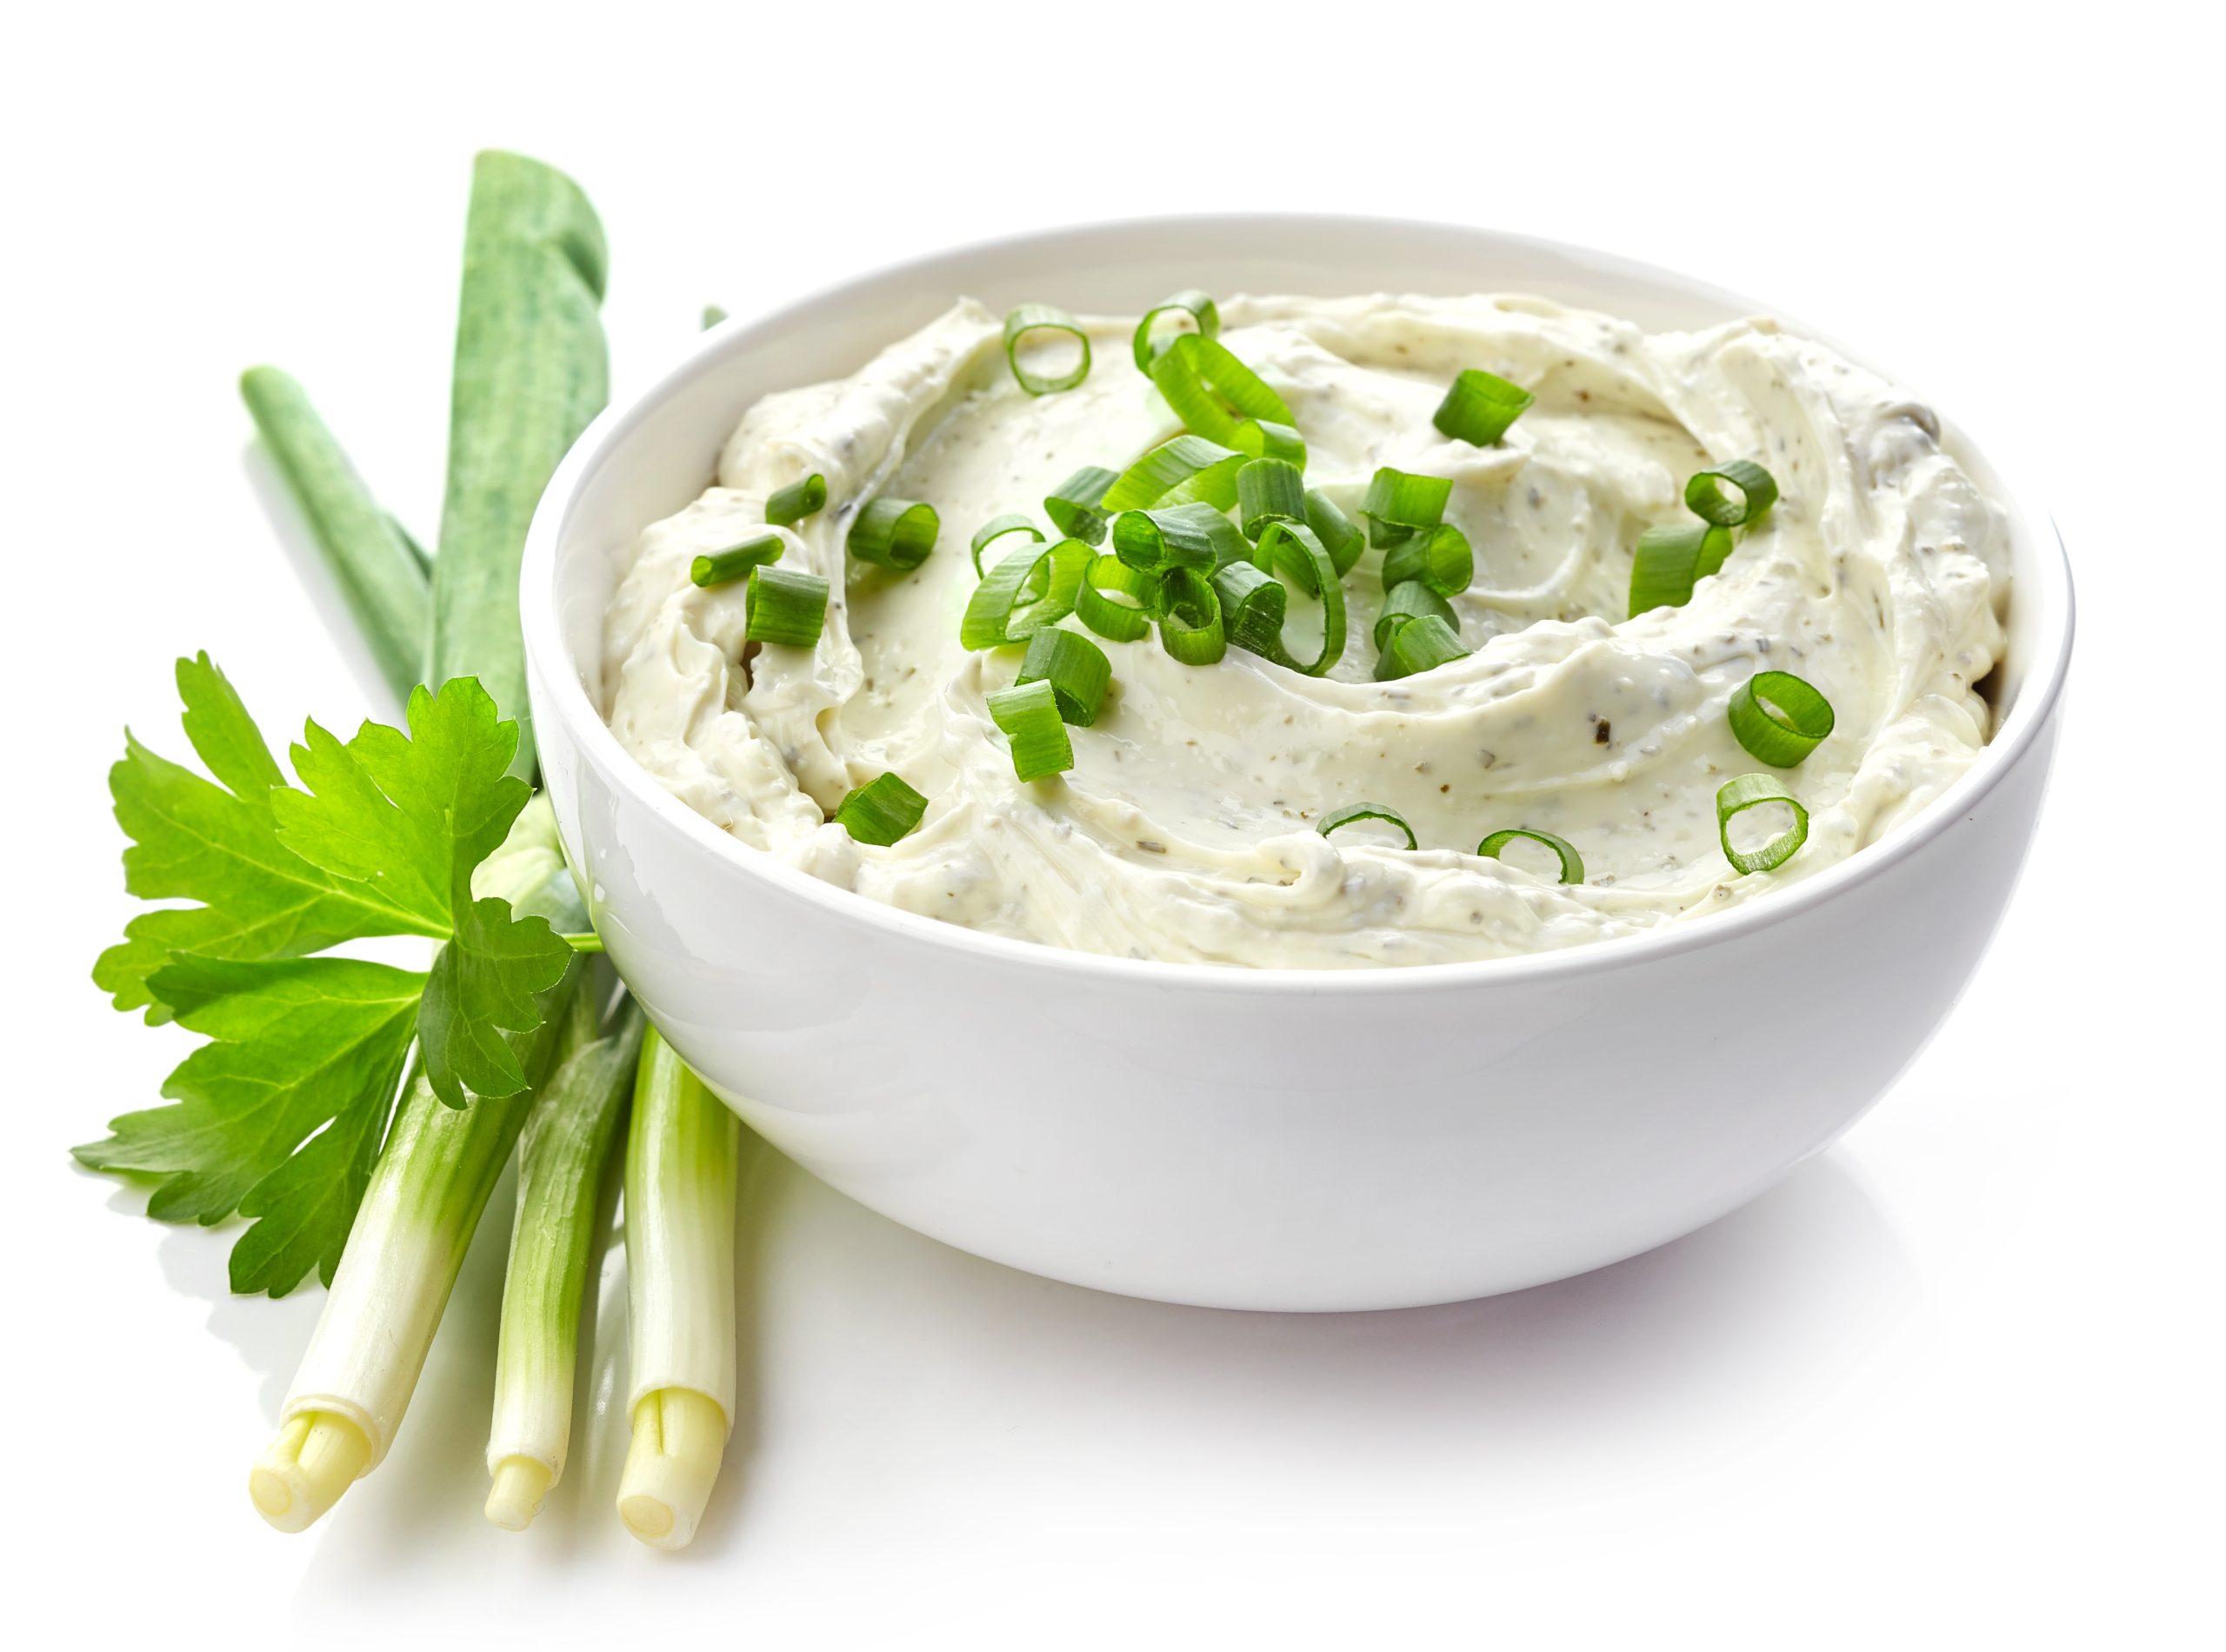 cream cheese and spring onions